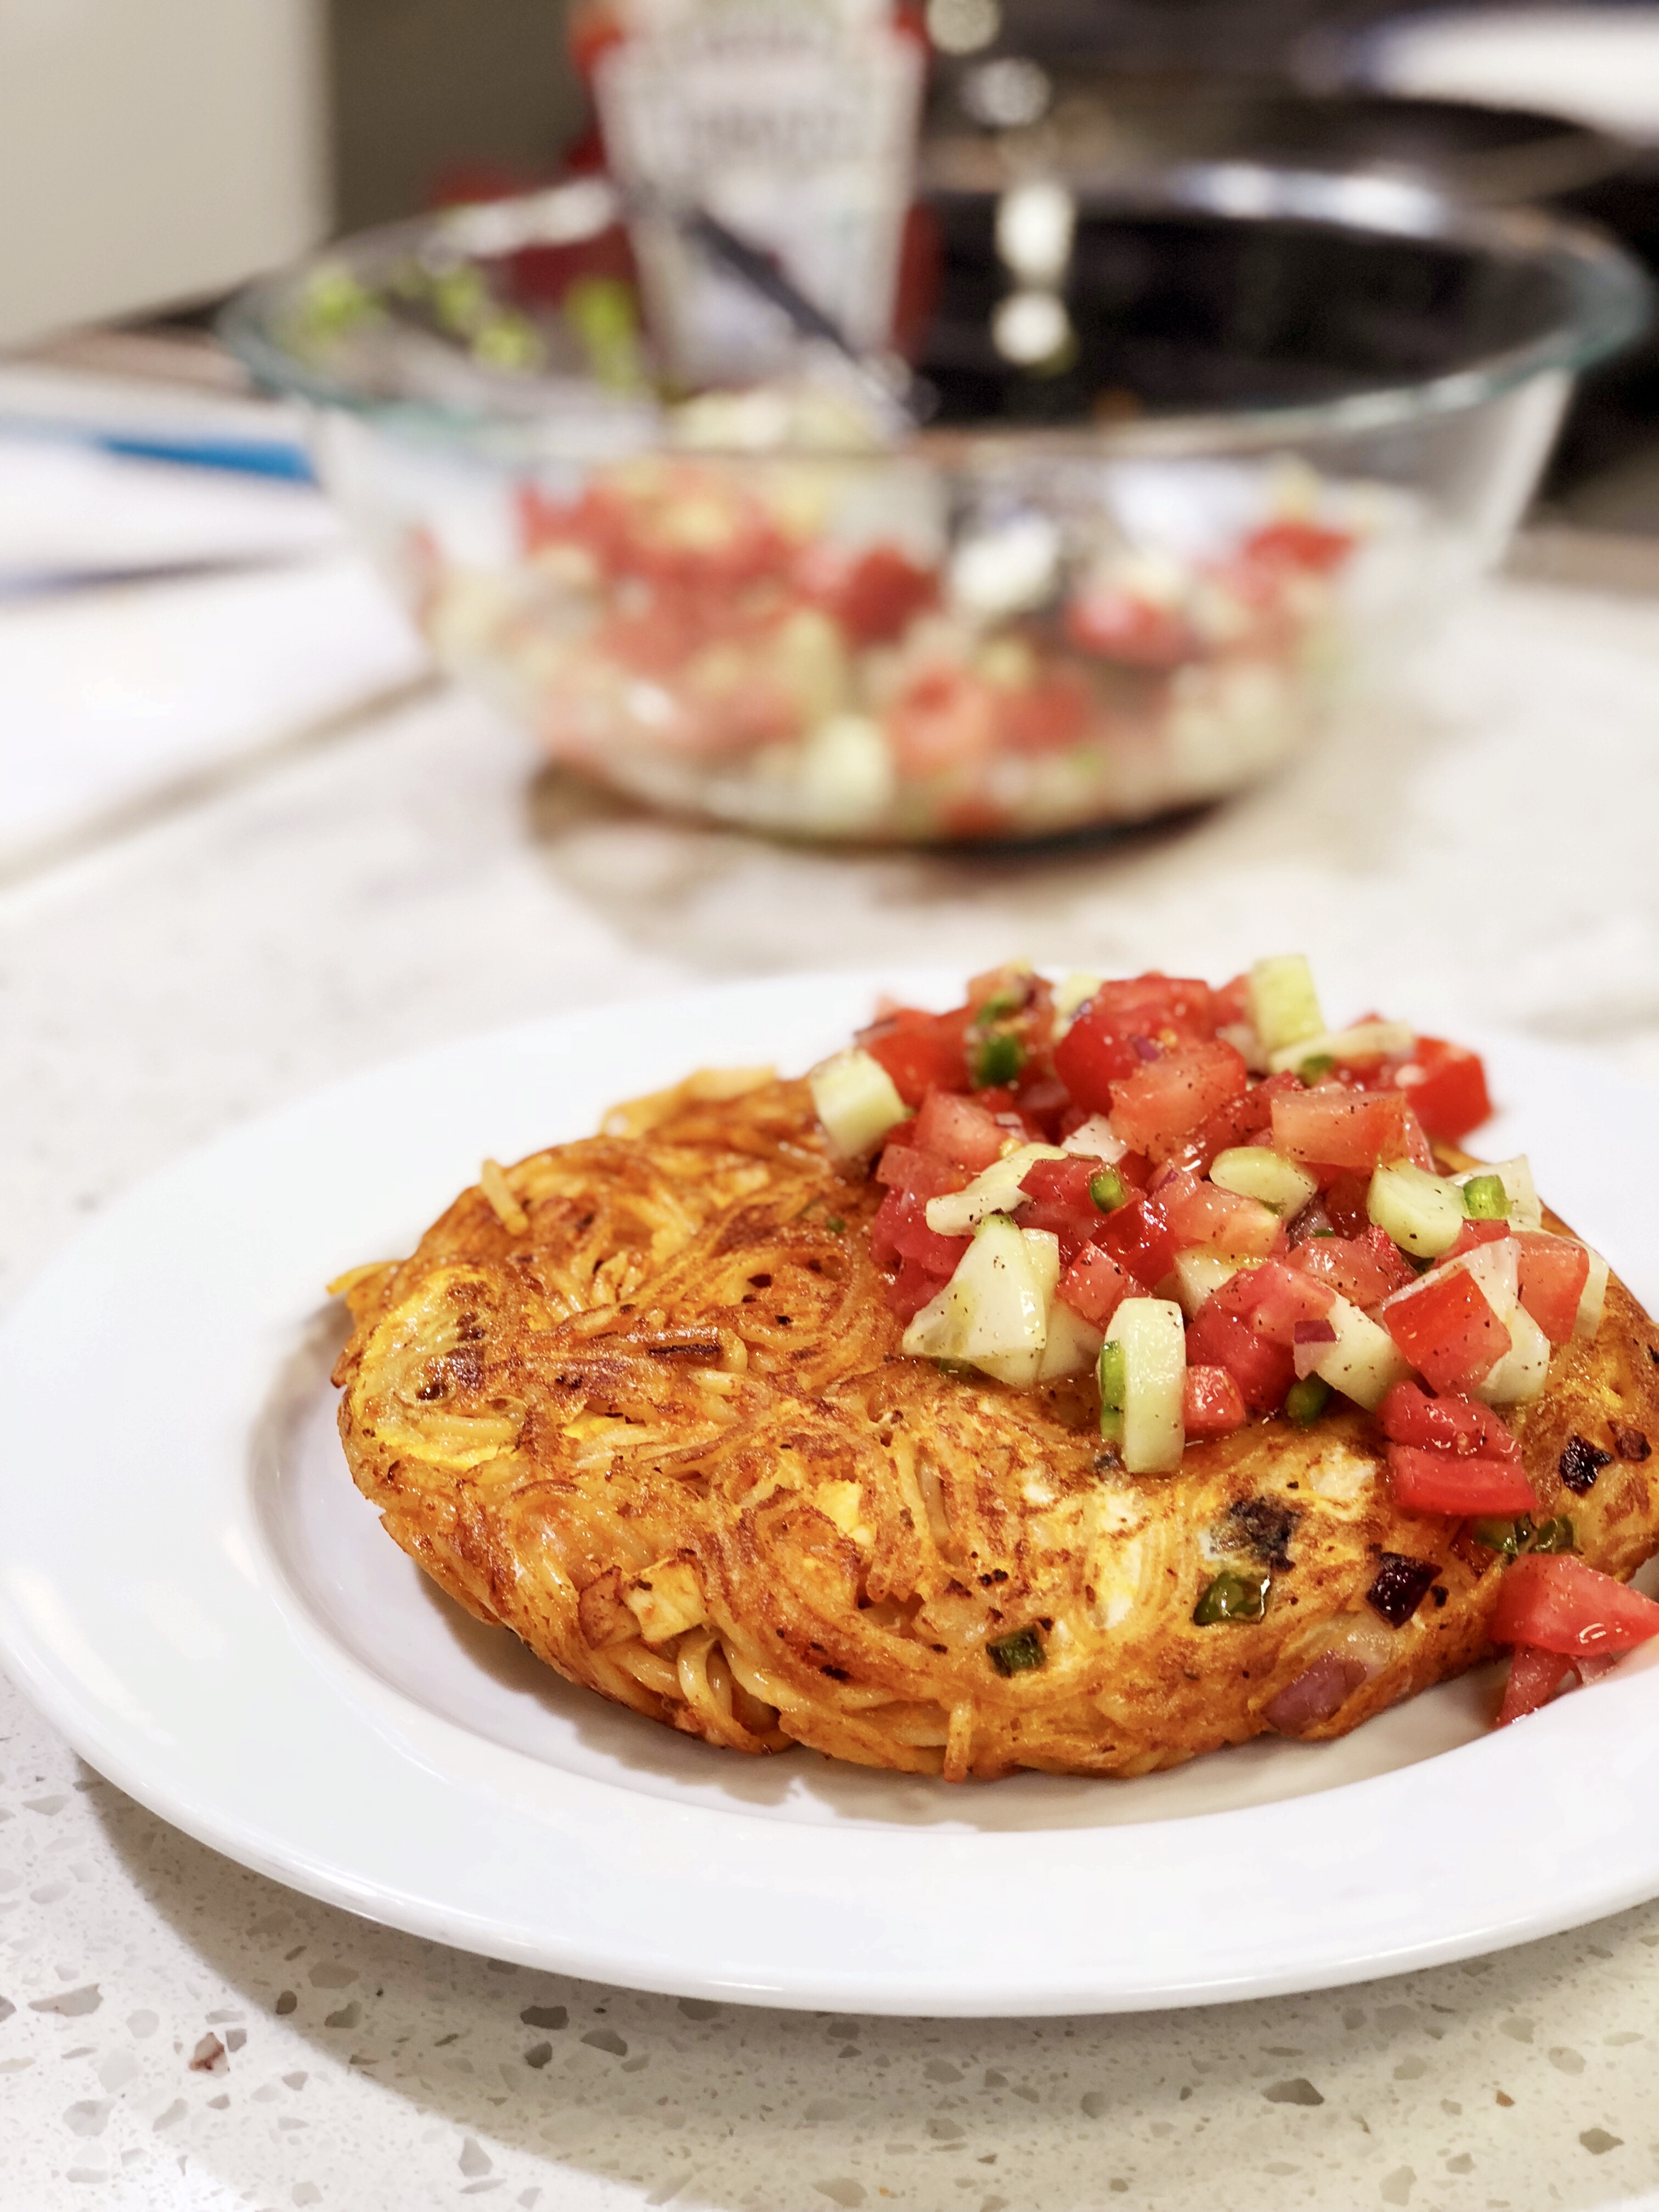 Spaghetti Frittata - cooking with chef bryan